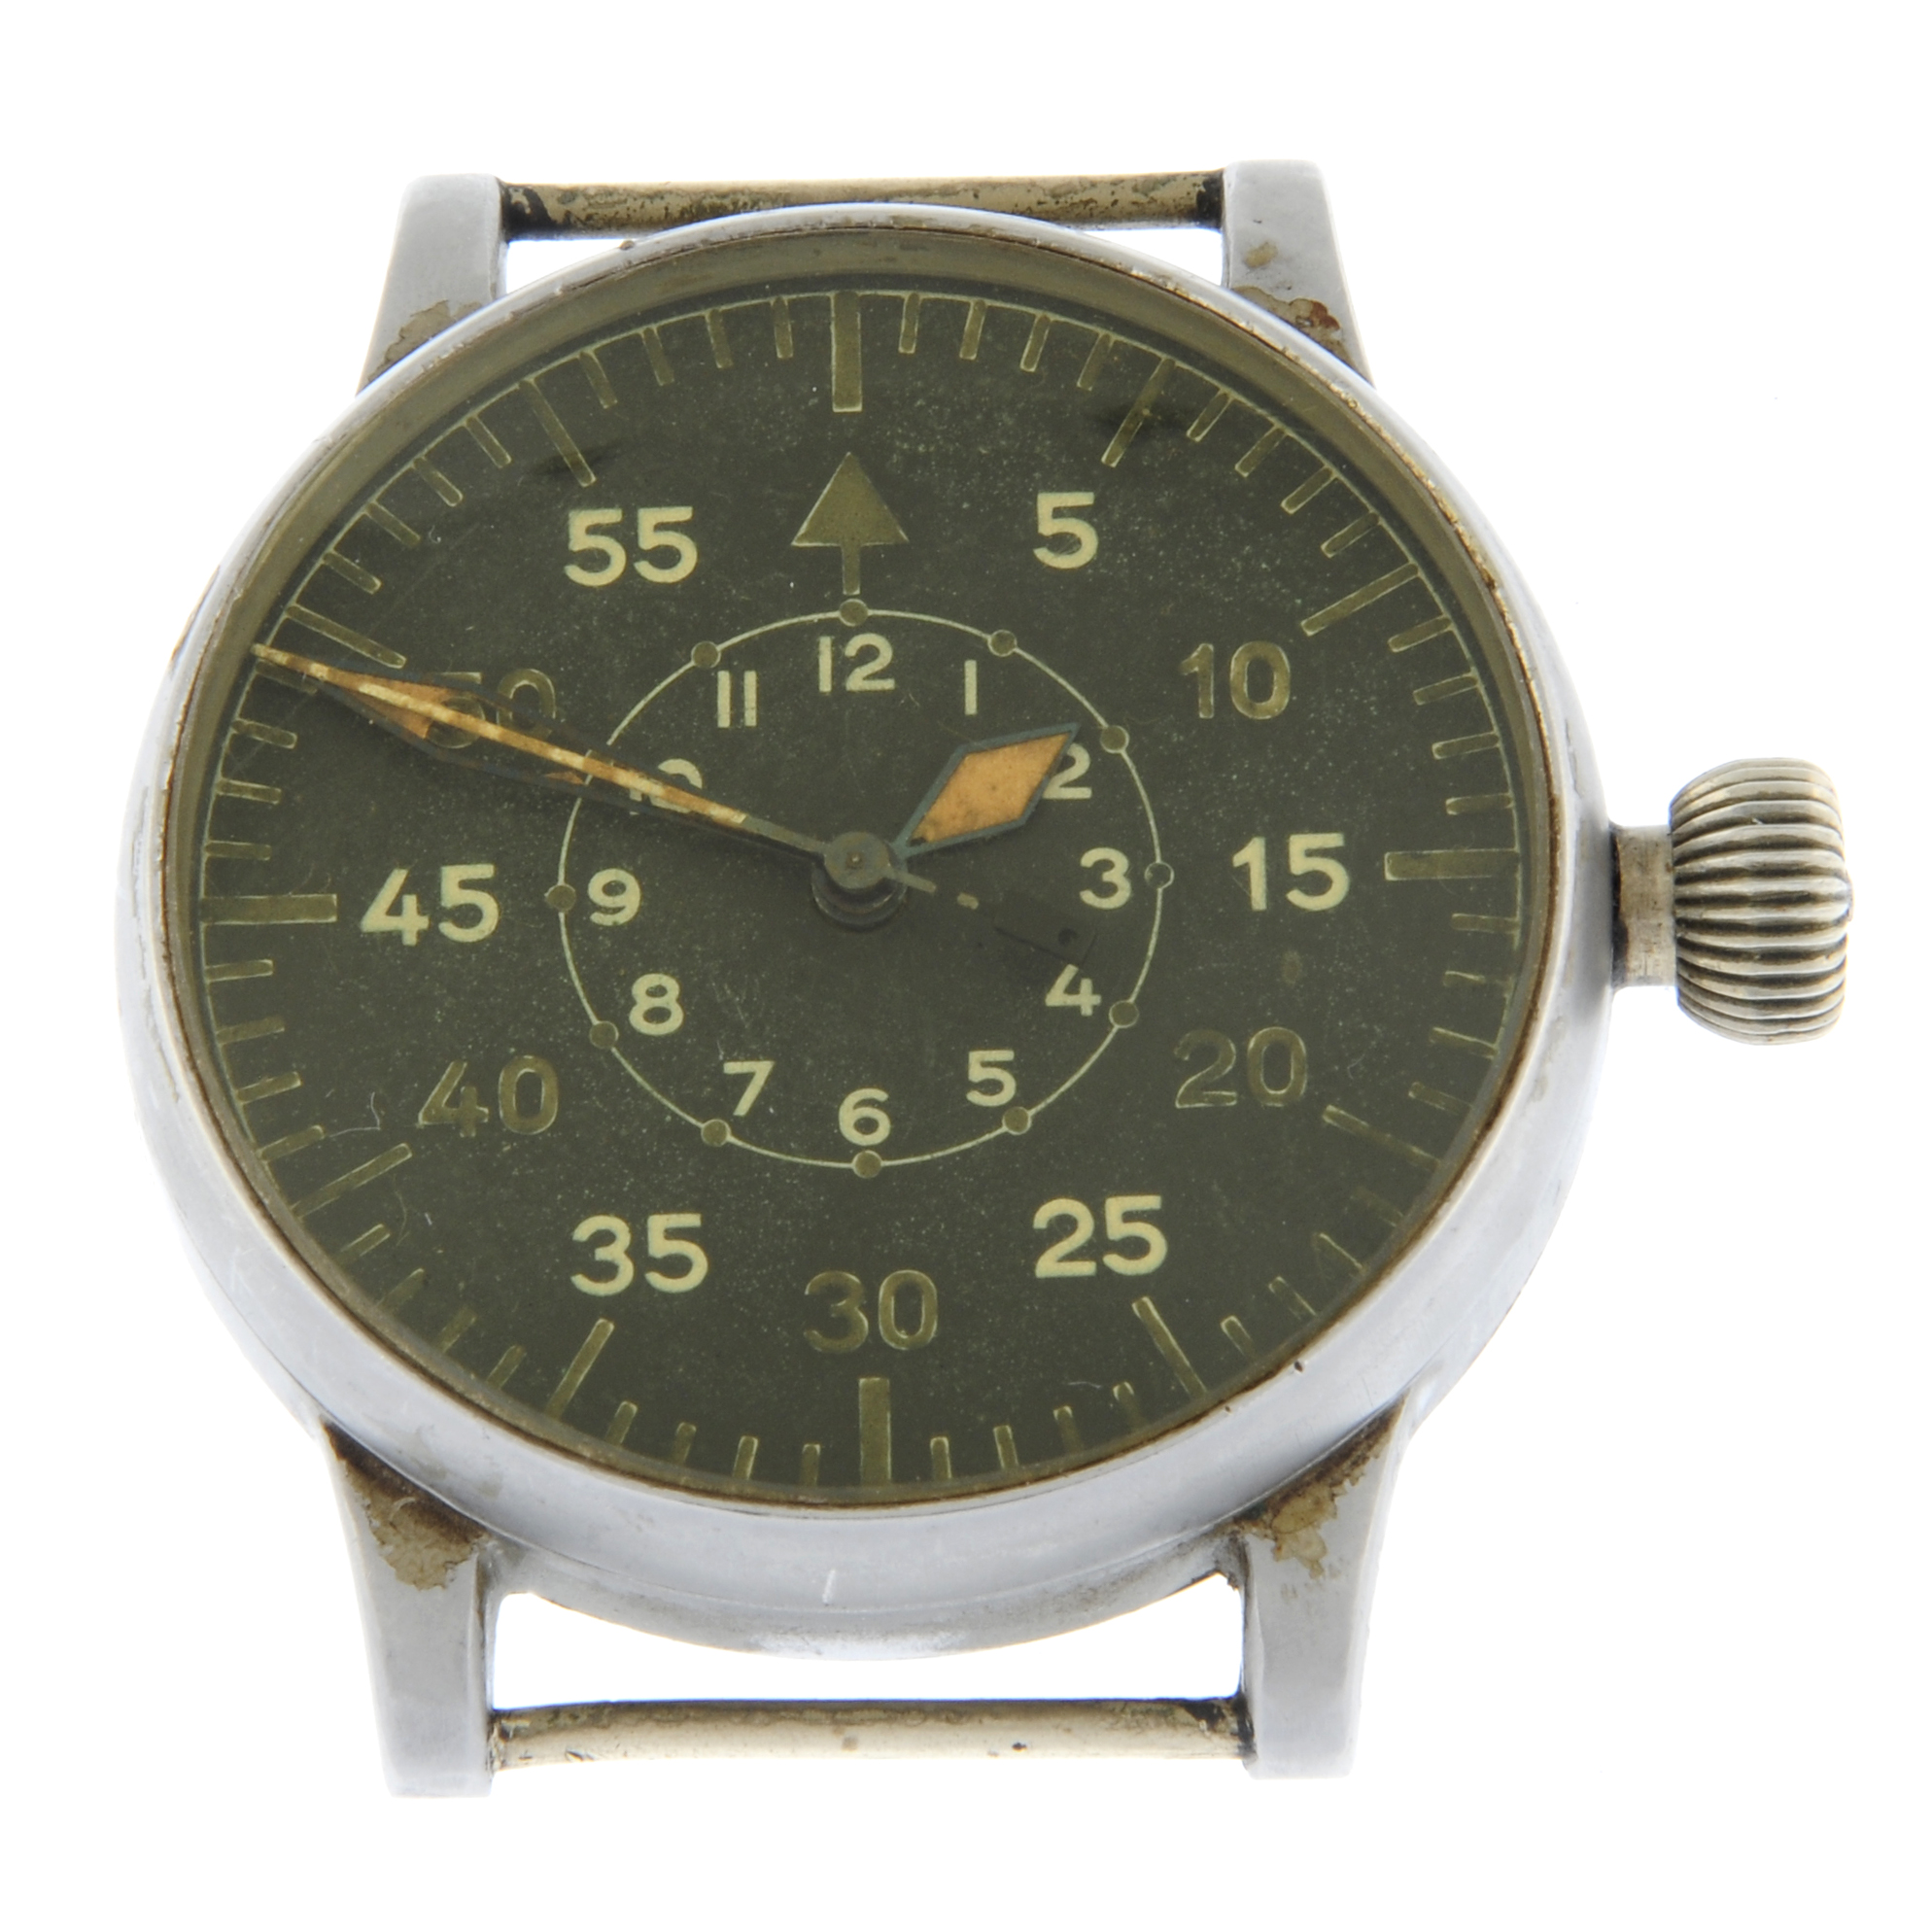 WWII German pilot's military-issue watch a historical highlight at Fellows,  Aug. 8